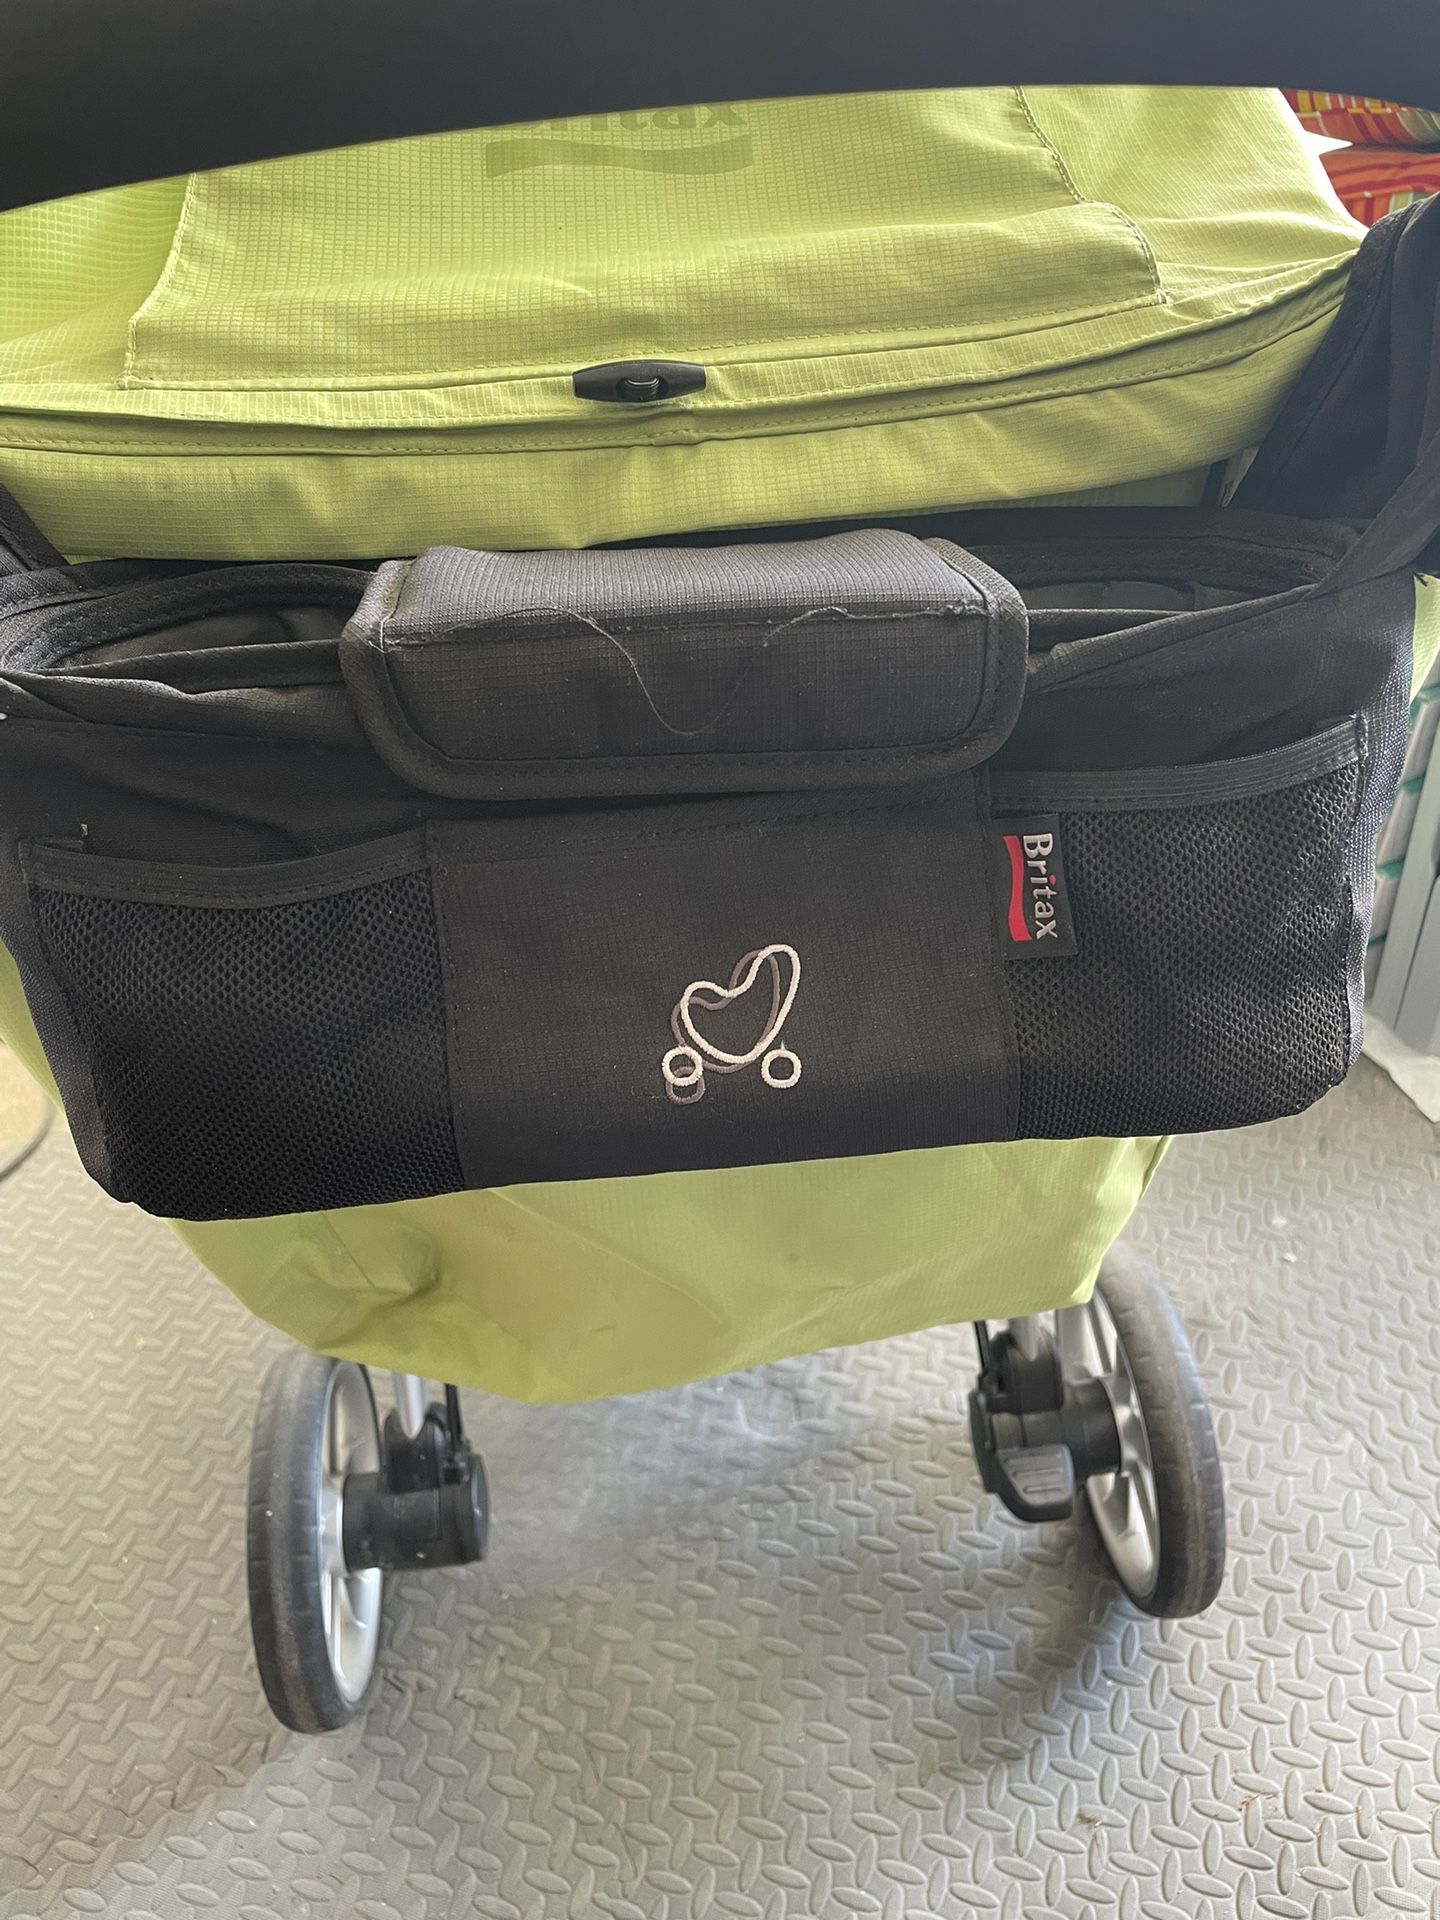 Britax Stroller With Extra Tray And Drink Holder